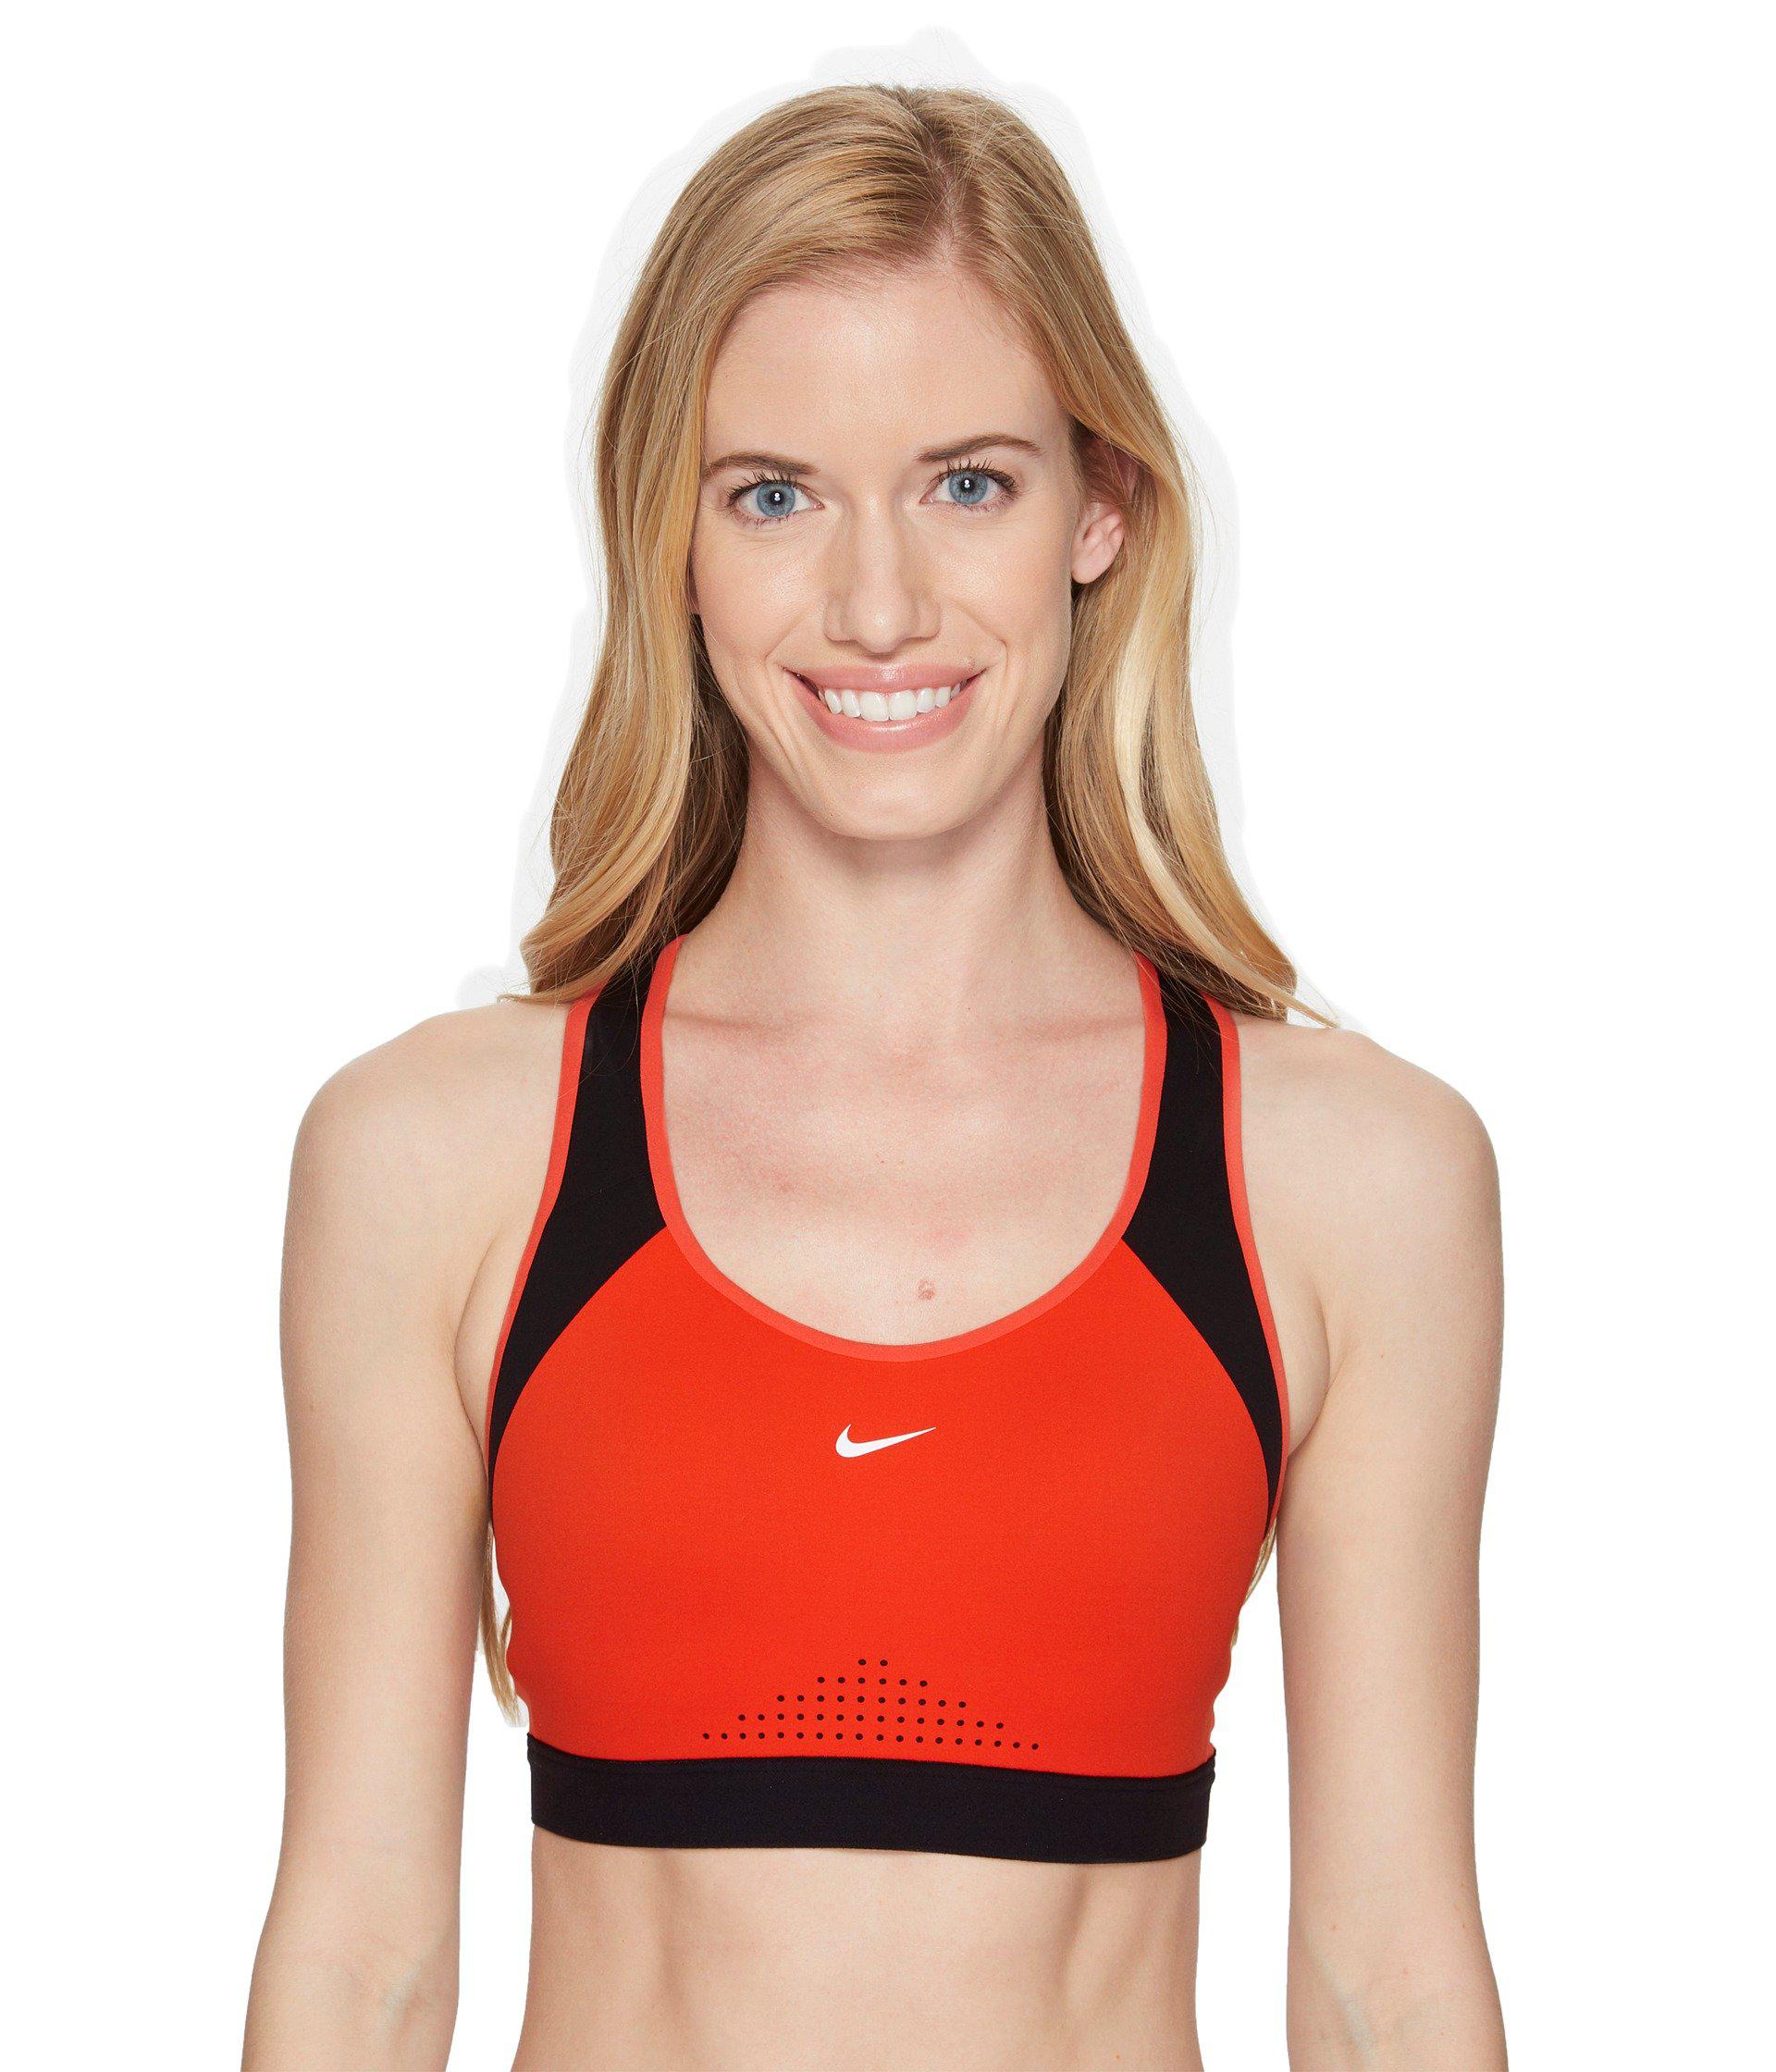 Wearing the right sports bra will not only keep you comfortable while worki...